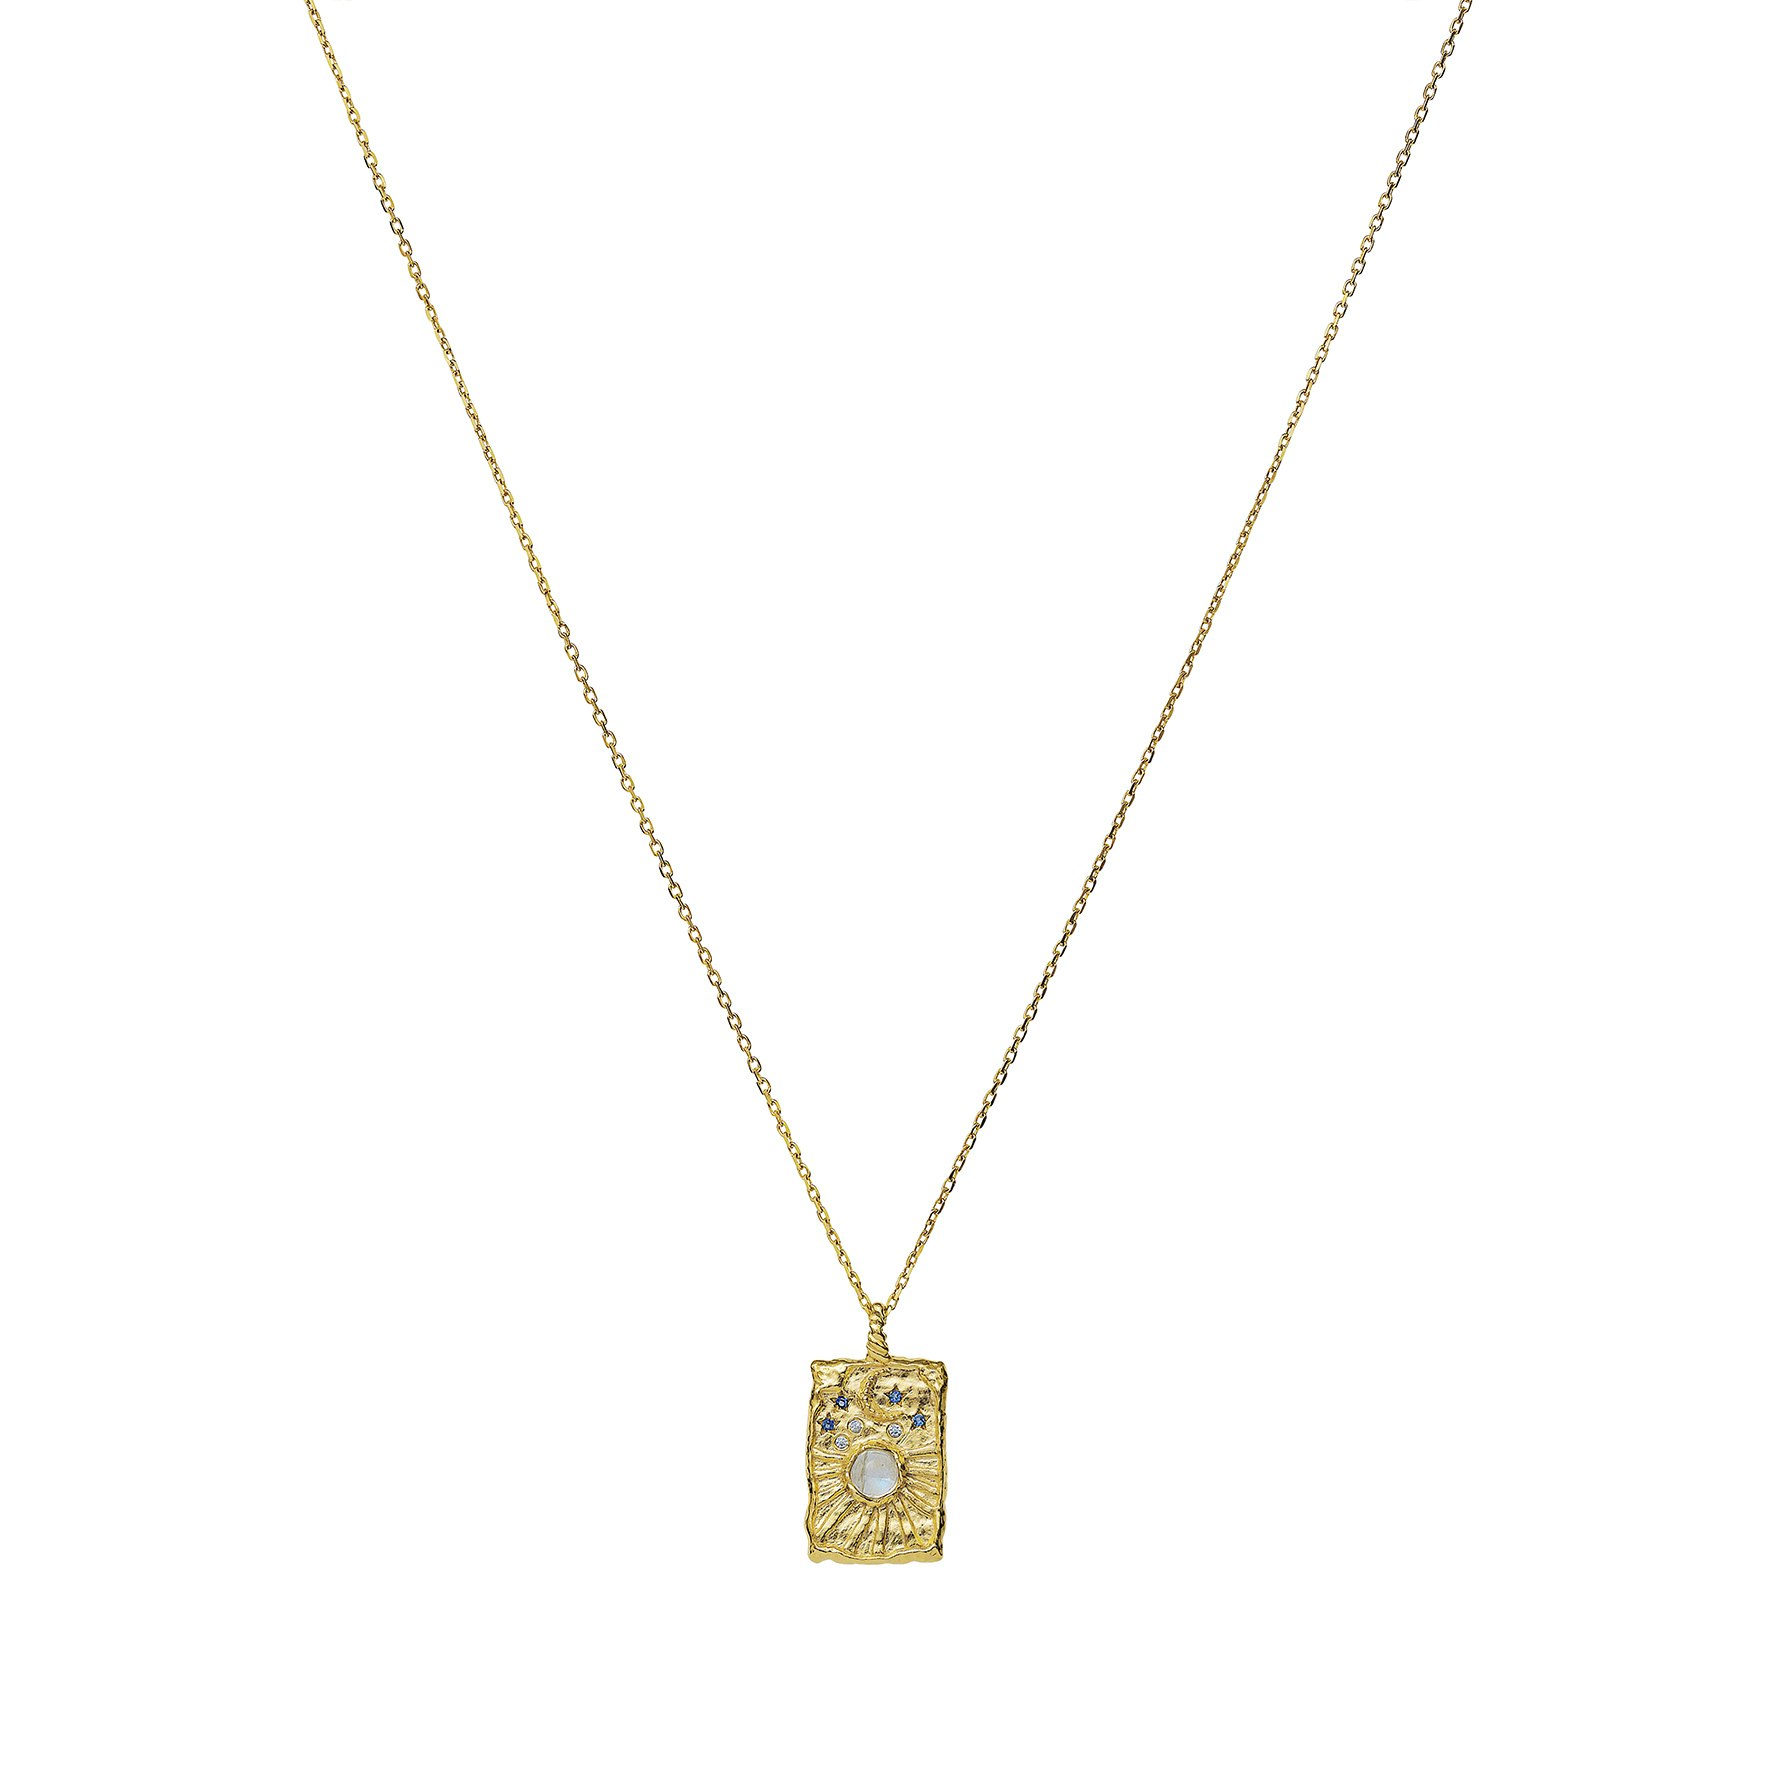 Aylin Necklace from Maanesten in Goldplated-Silver Sterling 925